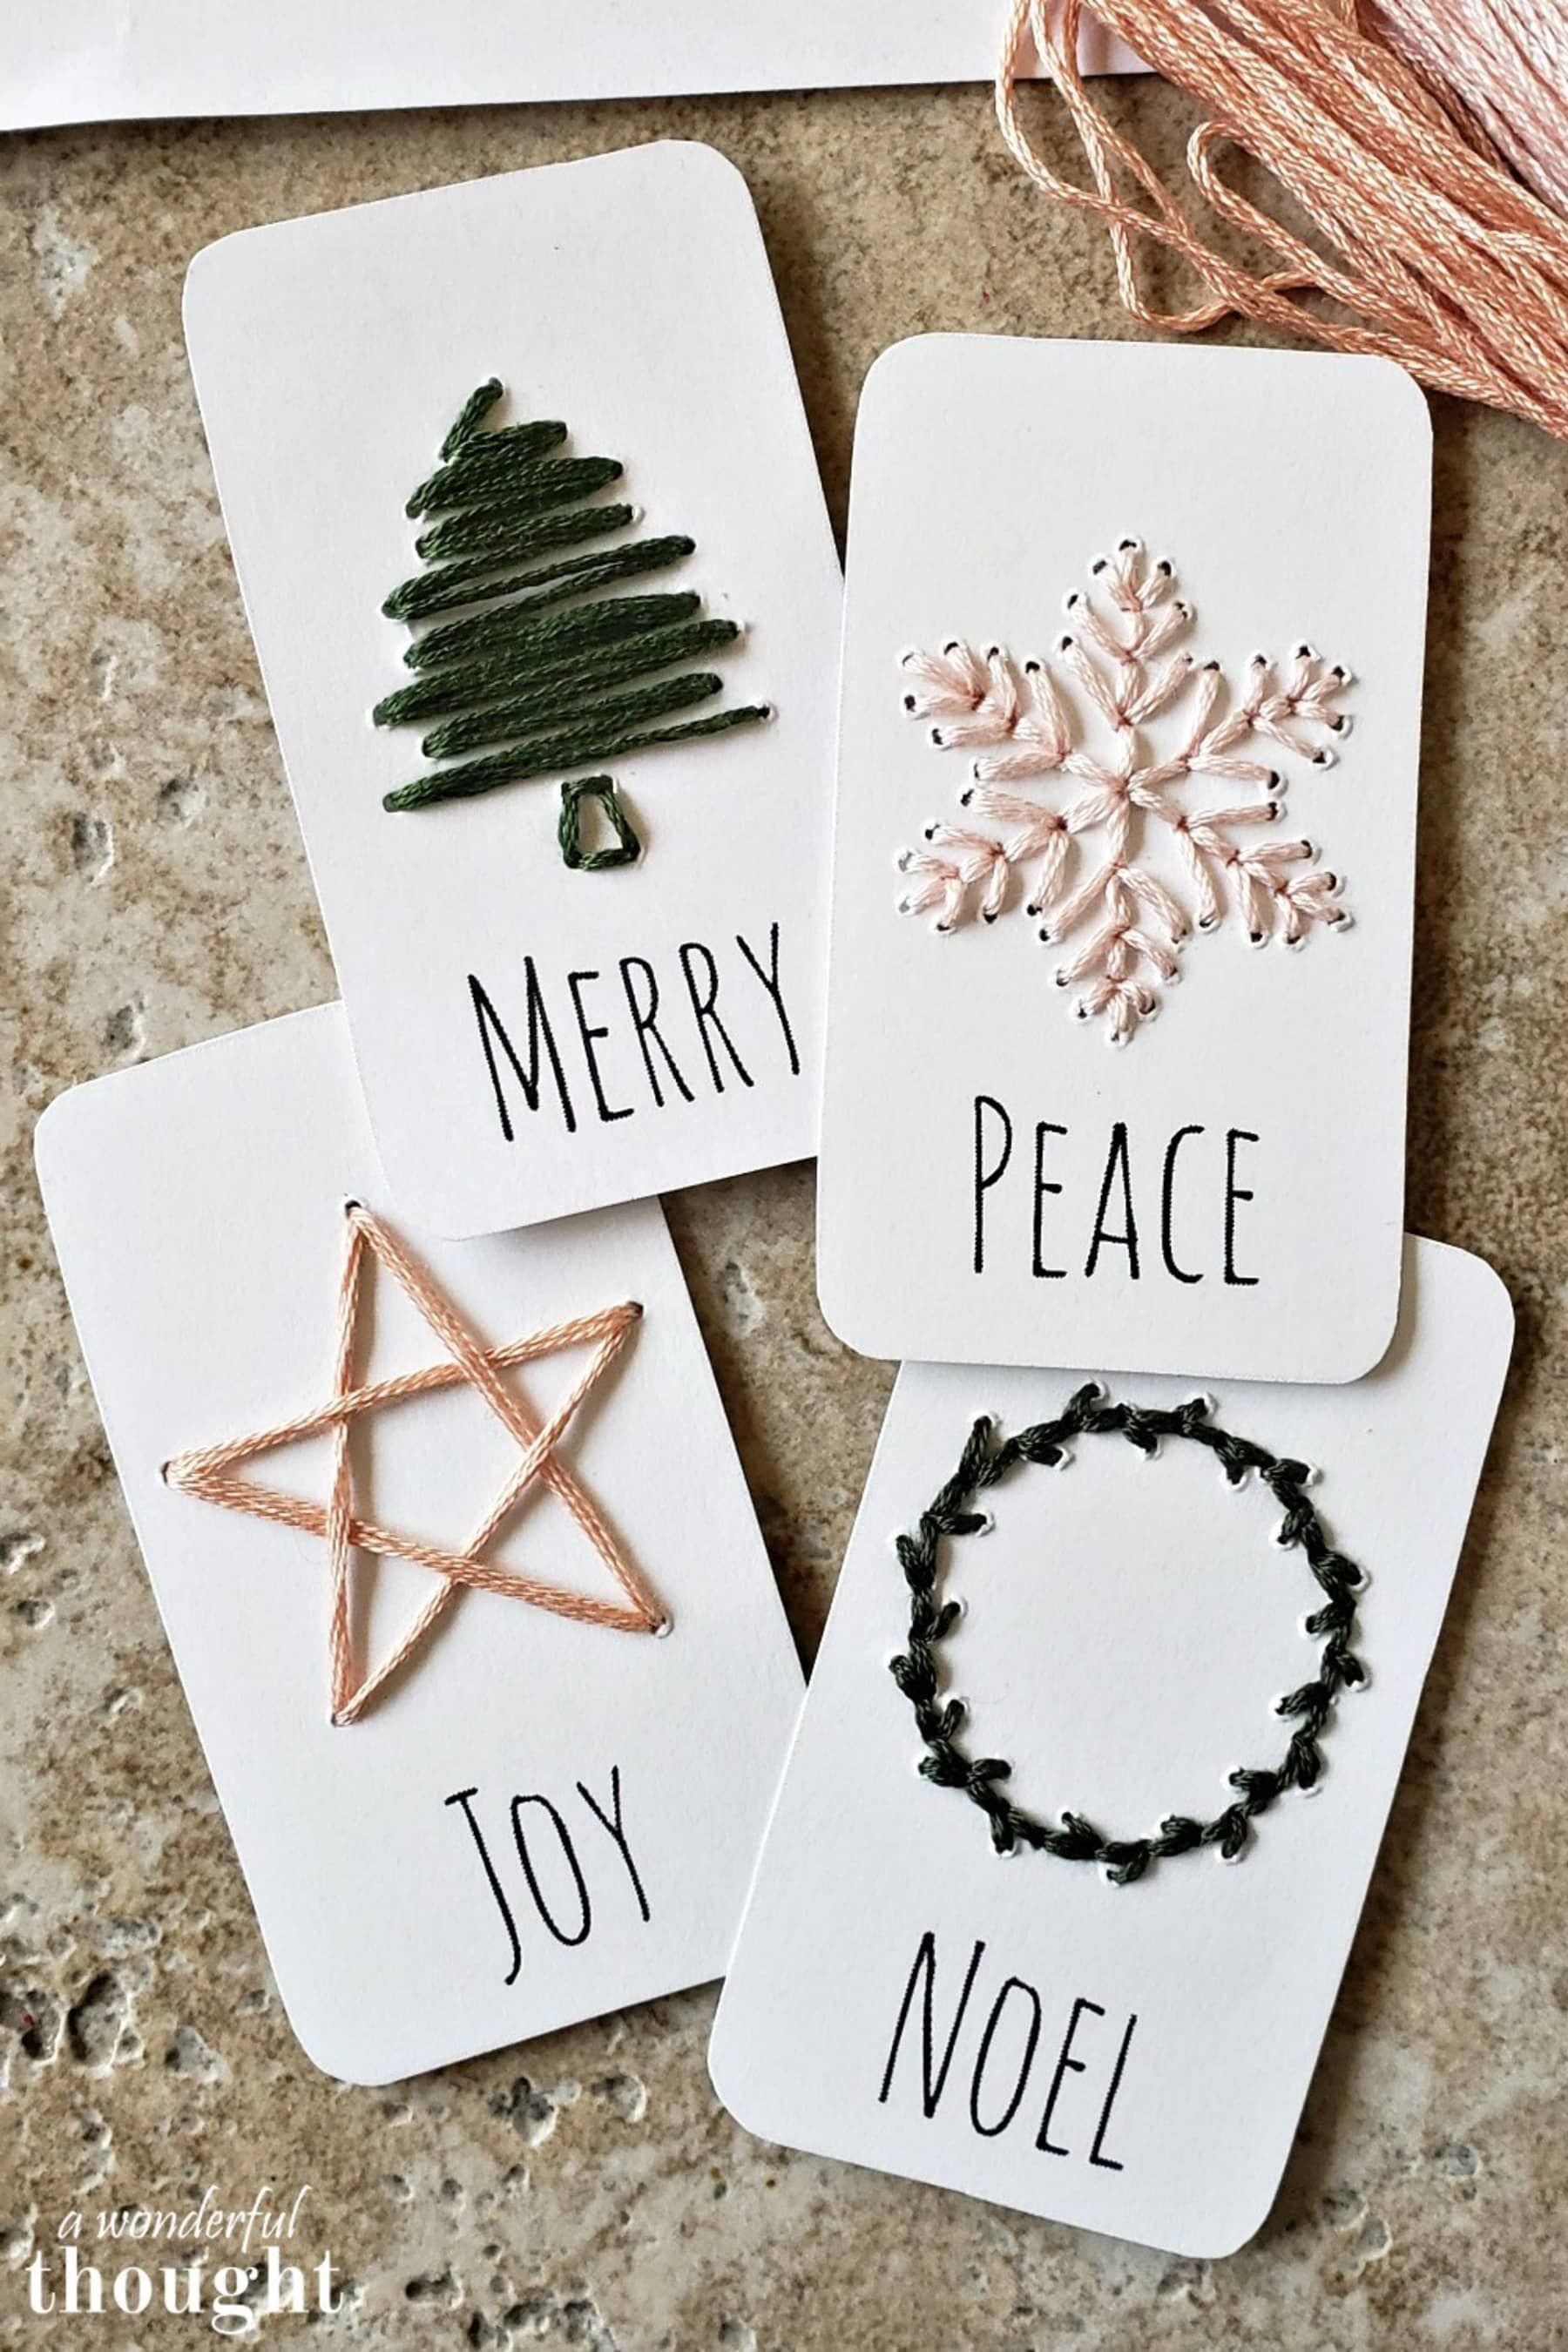 Biophilic & Sustainable Interior Design · Sustainable Christmas: gift wrapping and holiday cards ideas · DforDesign - Biophilic & Sustainable Interior Design · Sustainable Christmas: gift wrapping and holiday cards ideas · DforDesign -   19 diy Christmas tags ideas